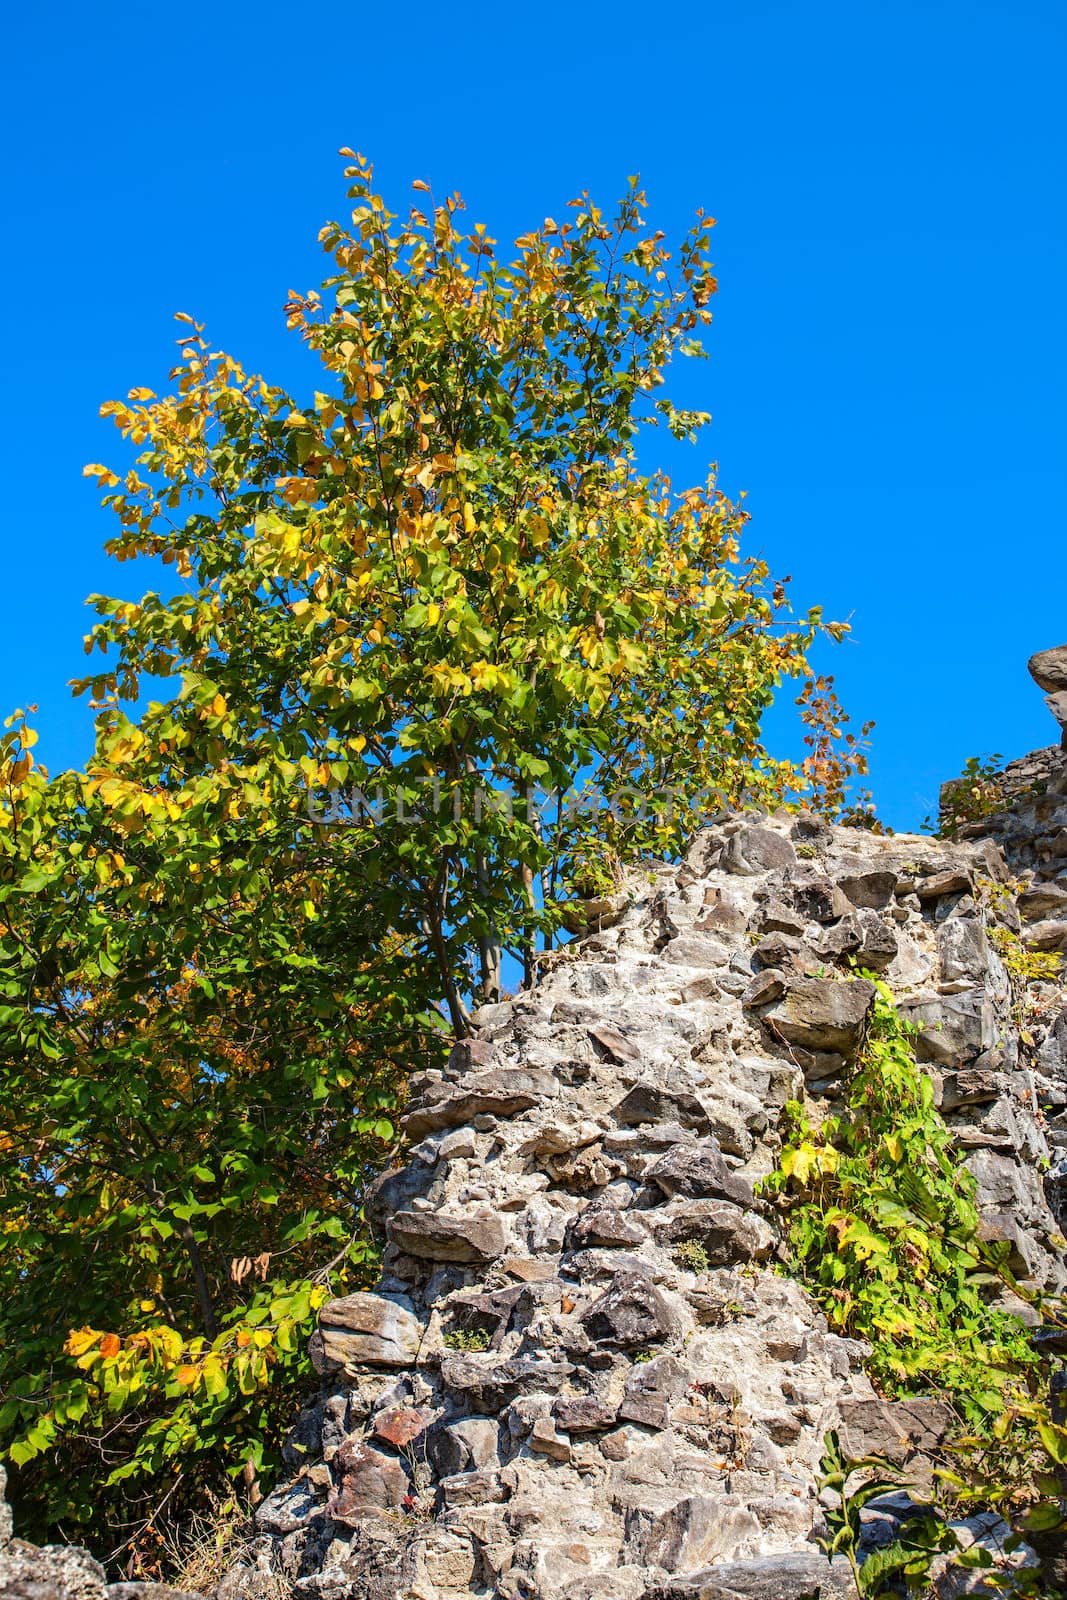 Wall of an old castle by palinchak